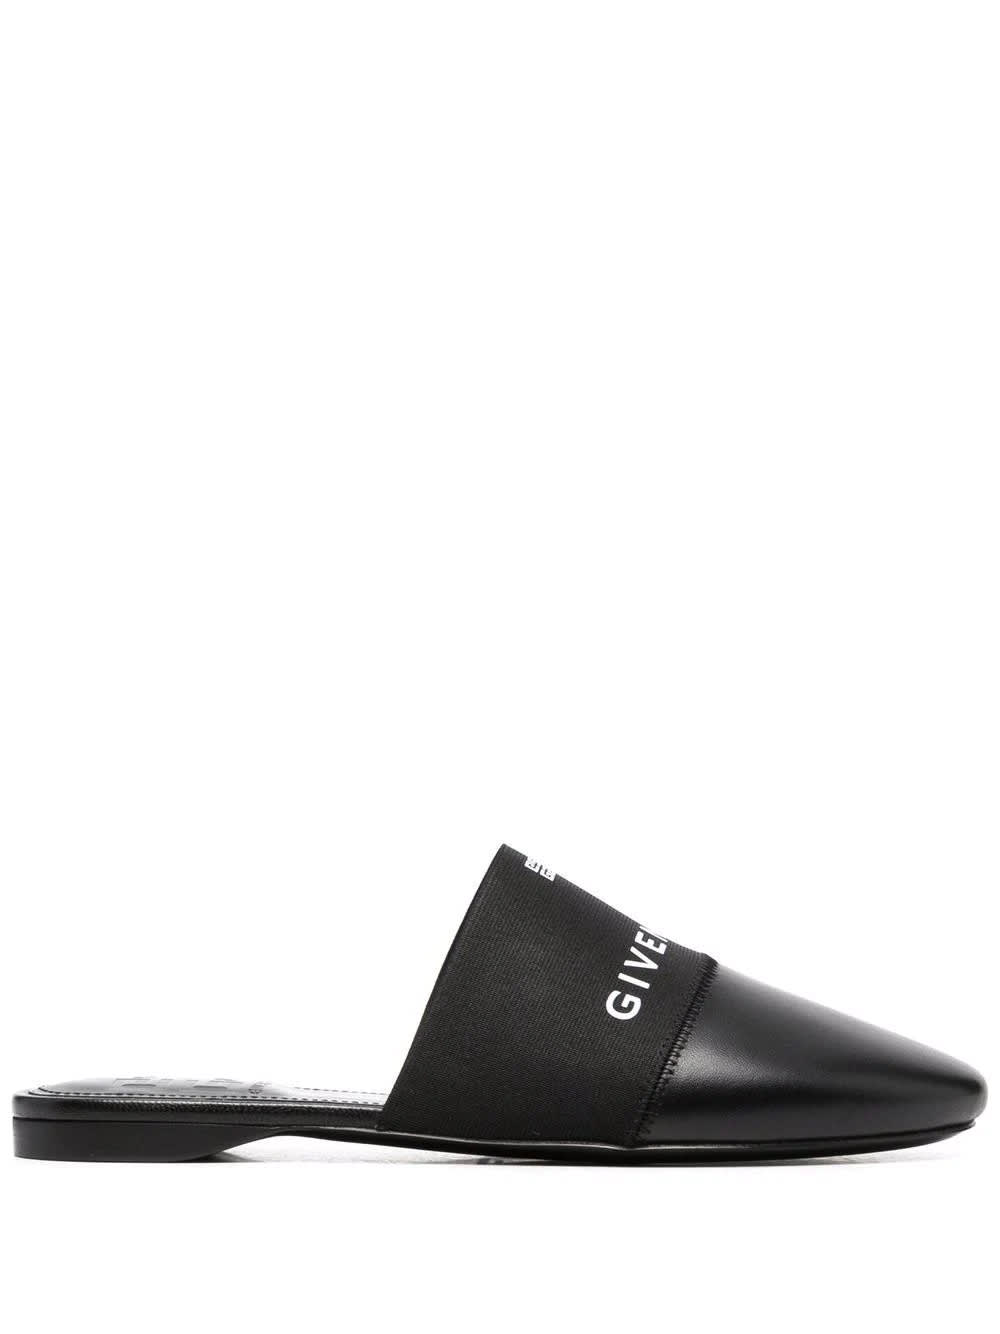 Buy Givenchy Woman 4g Flat Mules In Black Leather online, shop Givenchy shoes with free shipping